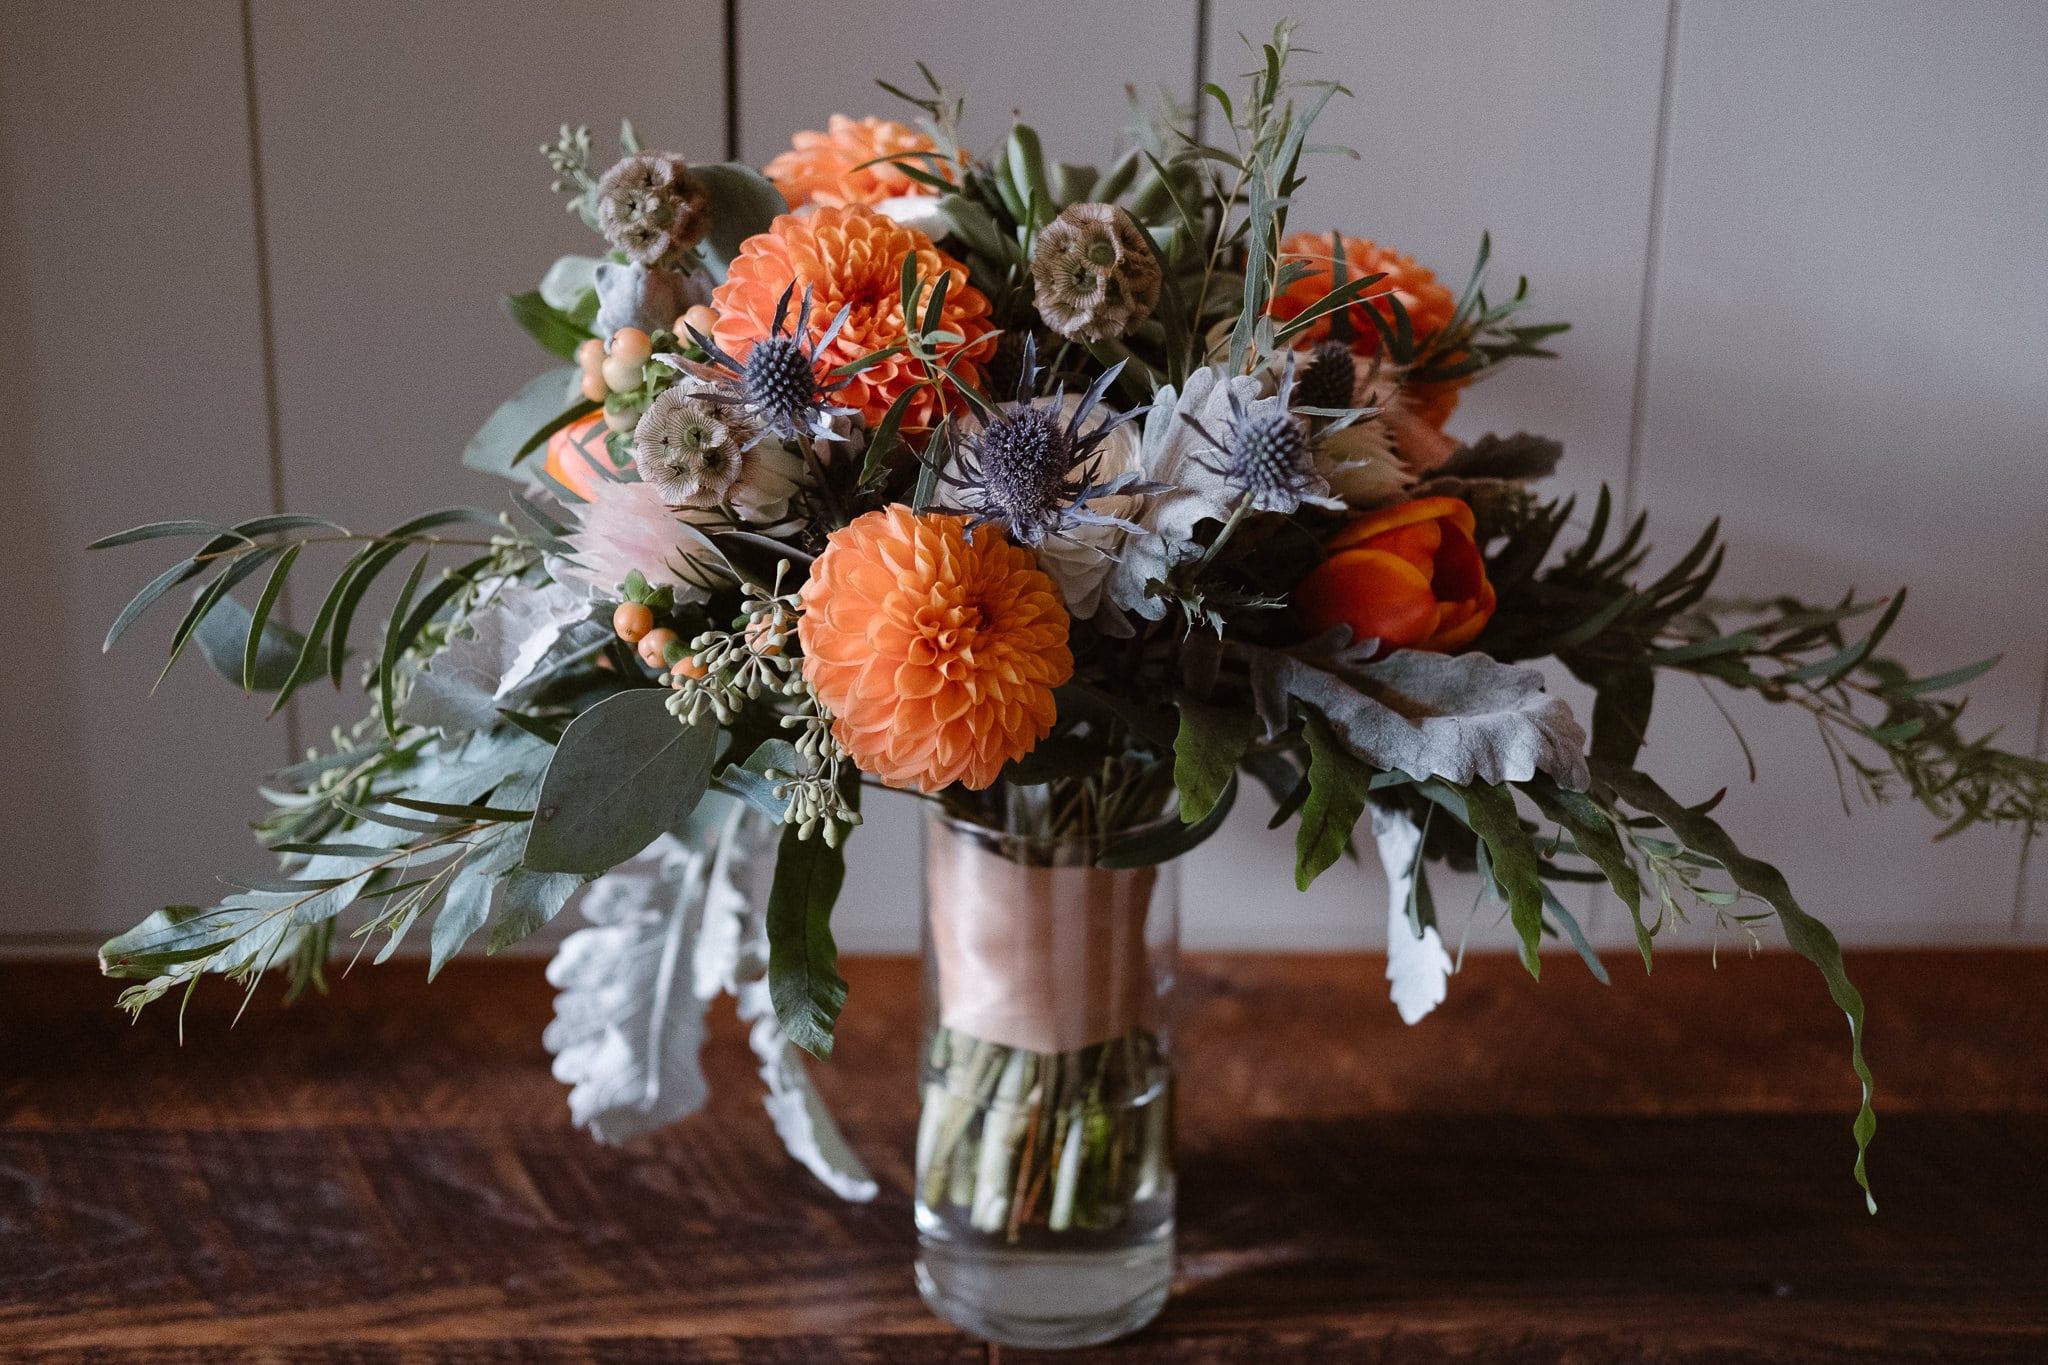 Crested Butte Wedding Photographer, Scarp Ridge Lodge intimate elopement, fall color bouquet by From the Ground Up Flowers